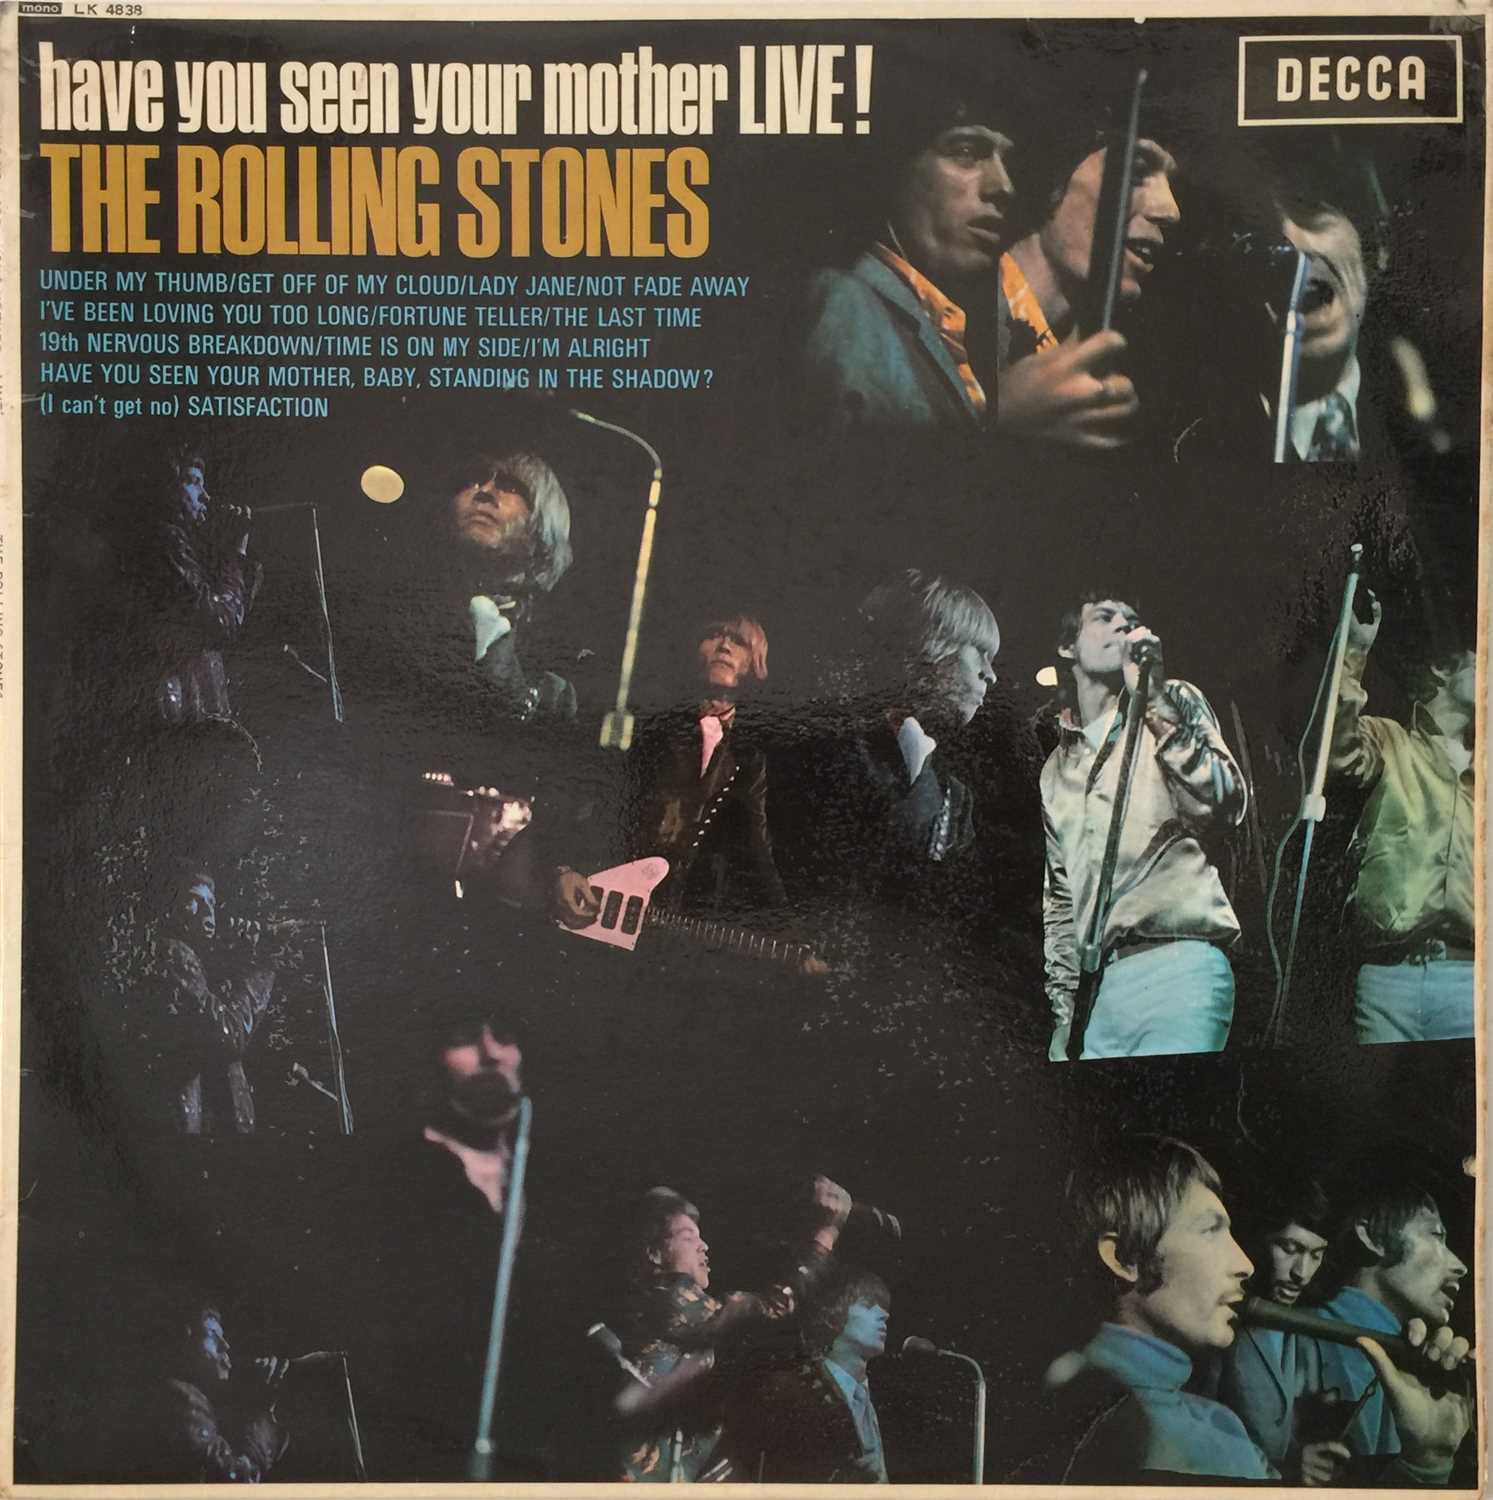 THE ROLLING STONES - HAVE YOU SEEN YOUR MOTHER - LIVE! LP (MONO LK 4838) - Image 2 of 5